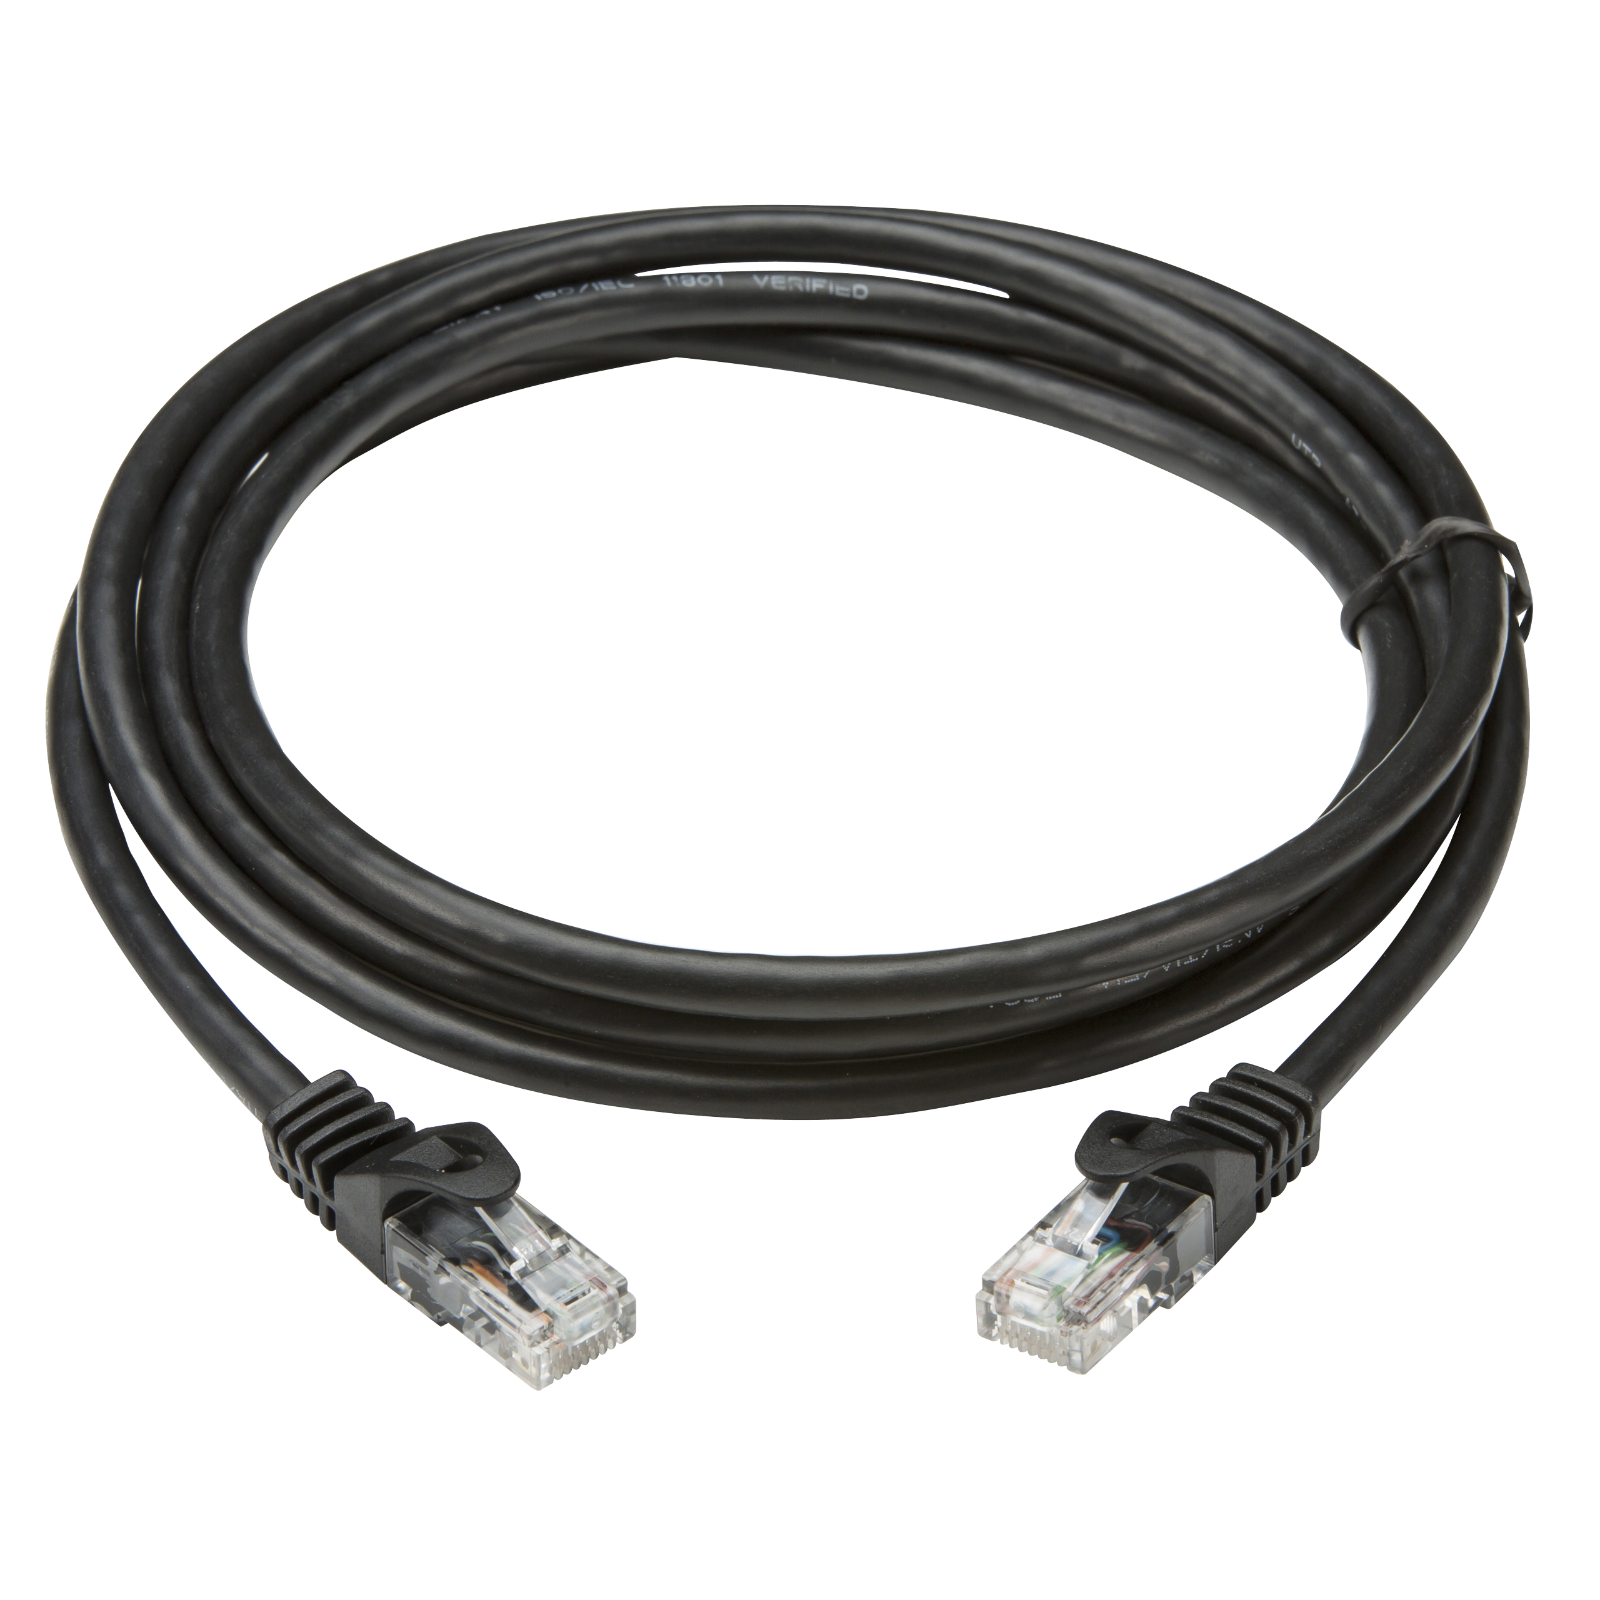 1m UTP CAT6 Networking Cable - Black - NETC61M 